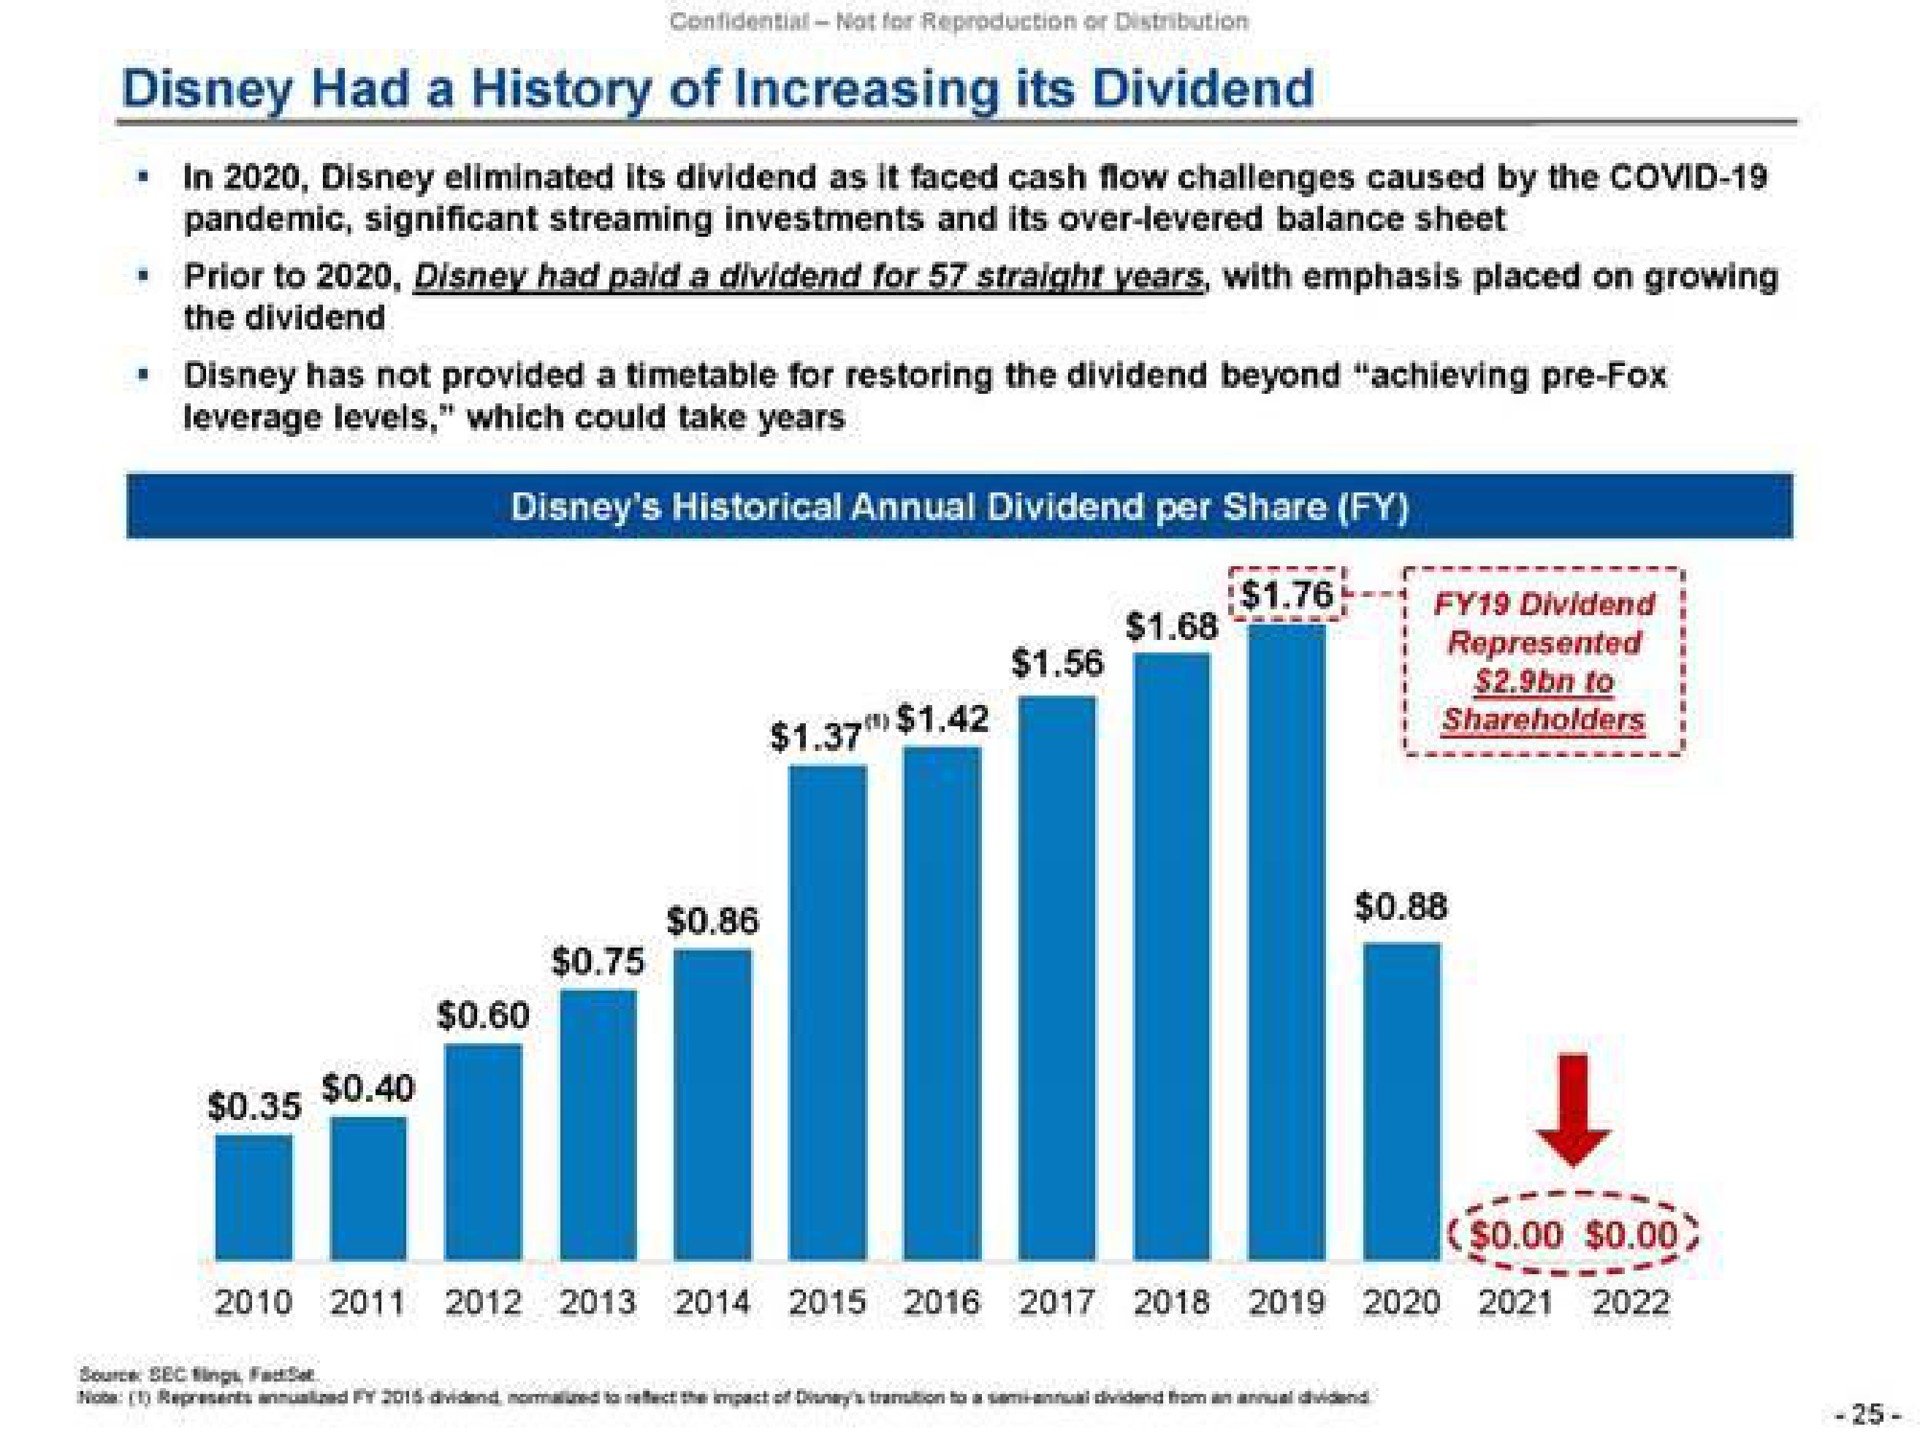 its dividend in eliminated its dividend as it faced cash flow challenges caused by the covid pandemic significant streaming investments and its over levered balance sheet ears with emphasis placed on growing has not provided a timetable for restoring the dividend beyond achieving fox leverage levels which could take years i dividend represented to shareholders | Trian Partners